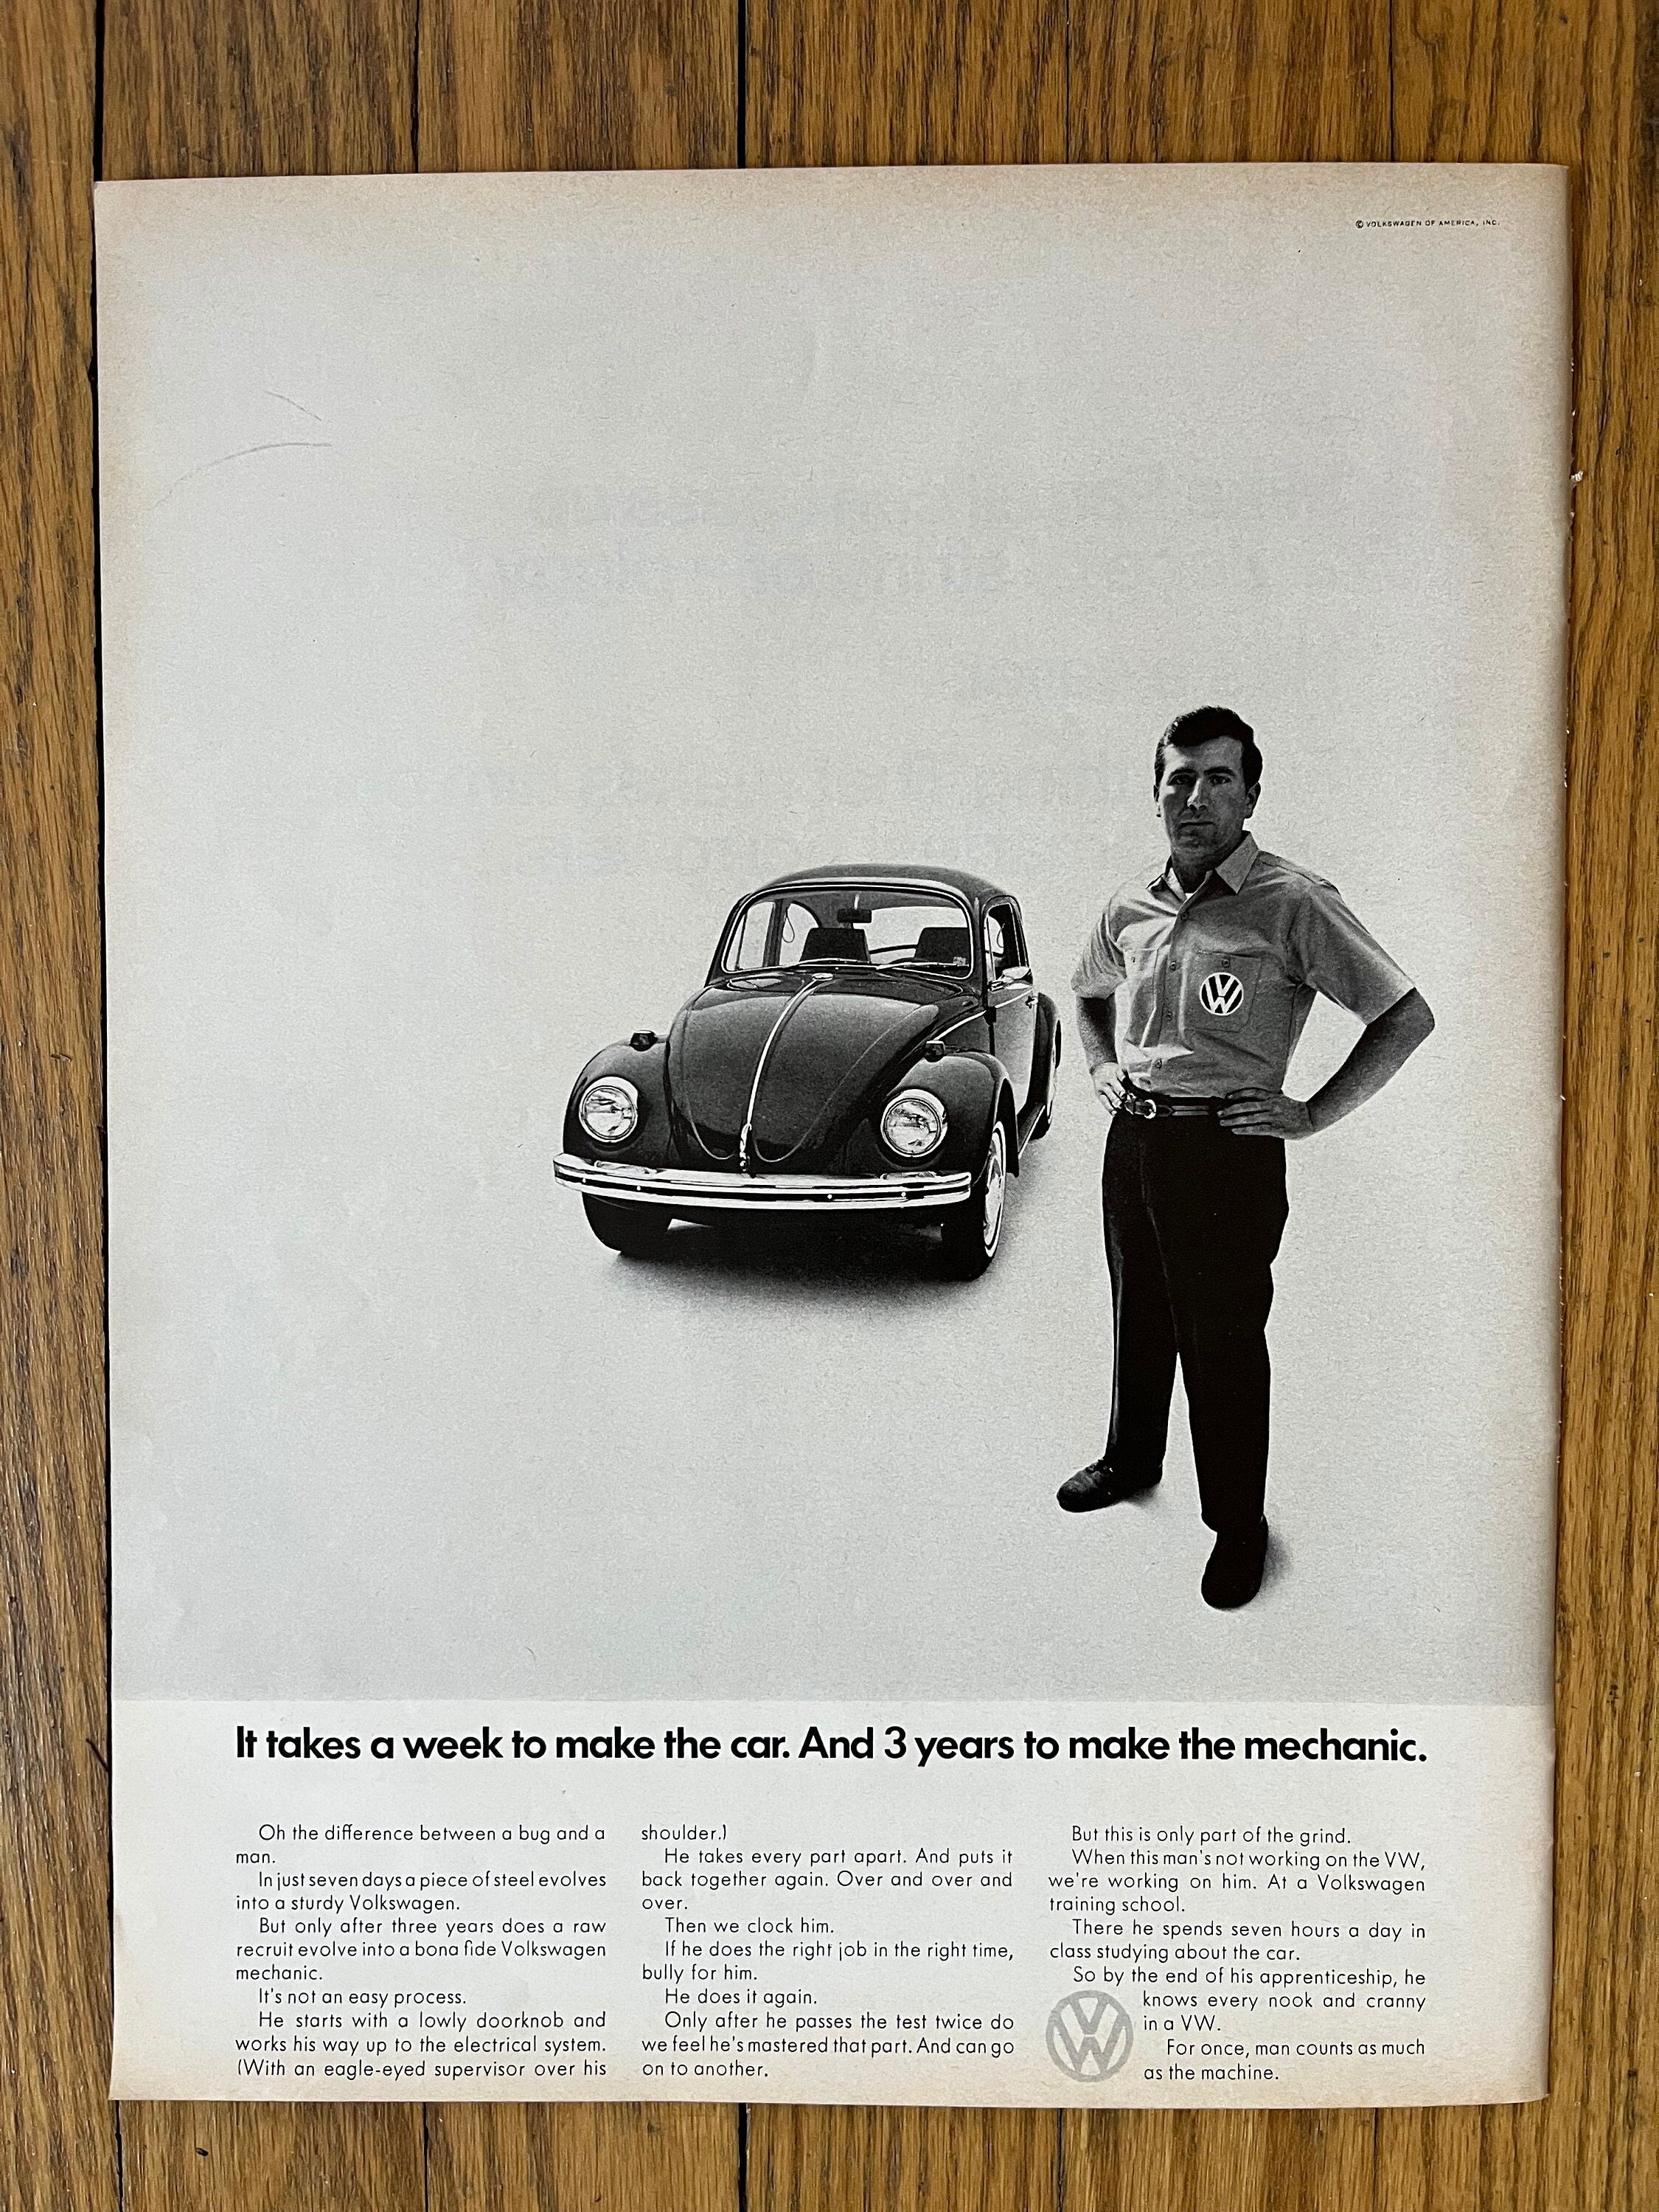 1968 Volkswagen Original Advertisement, It Takes a Week to Make a VW and 3  Years to Make the Mechanic Great Look as Always With Volkswagen 